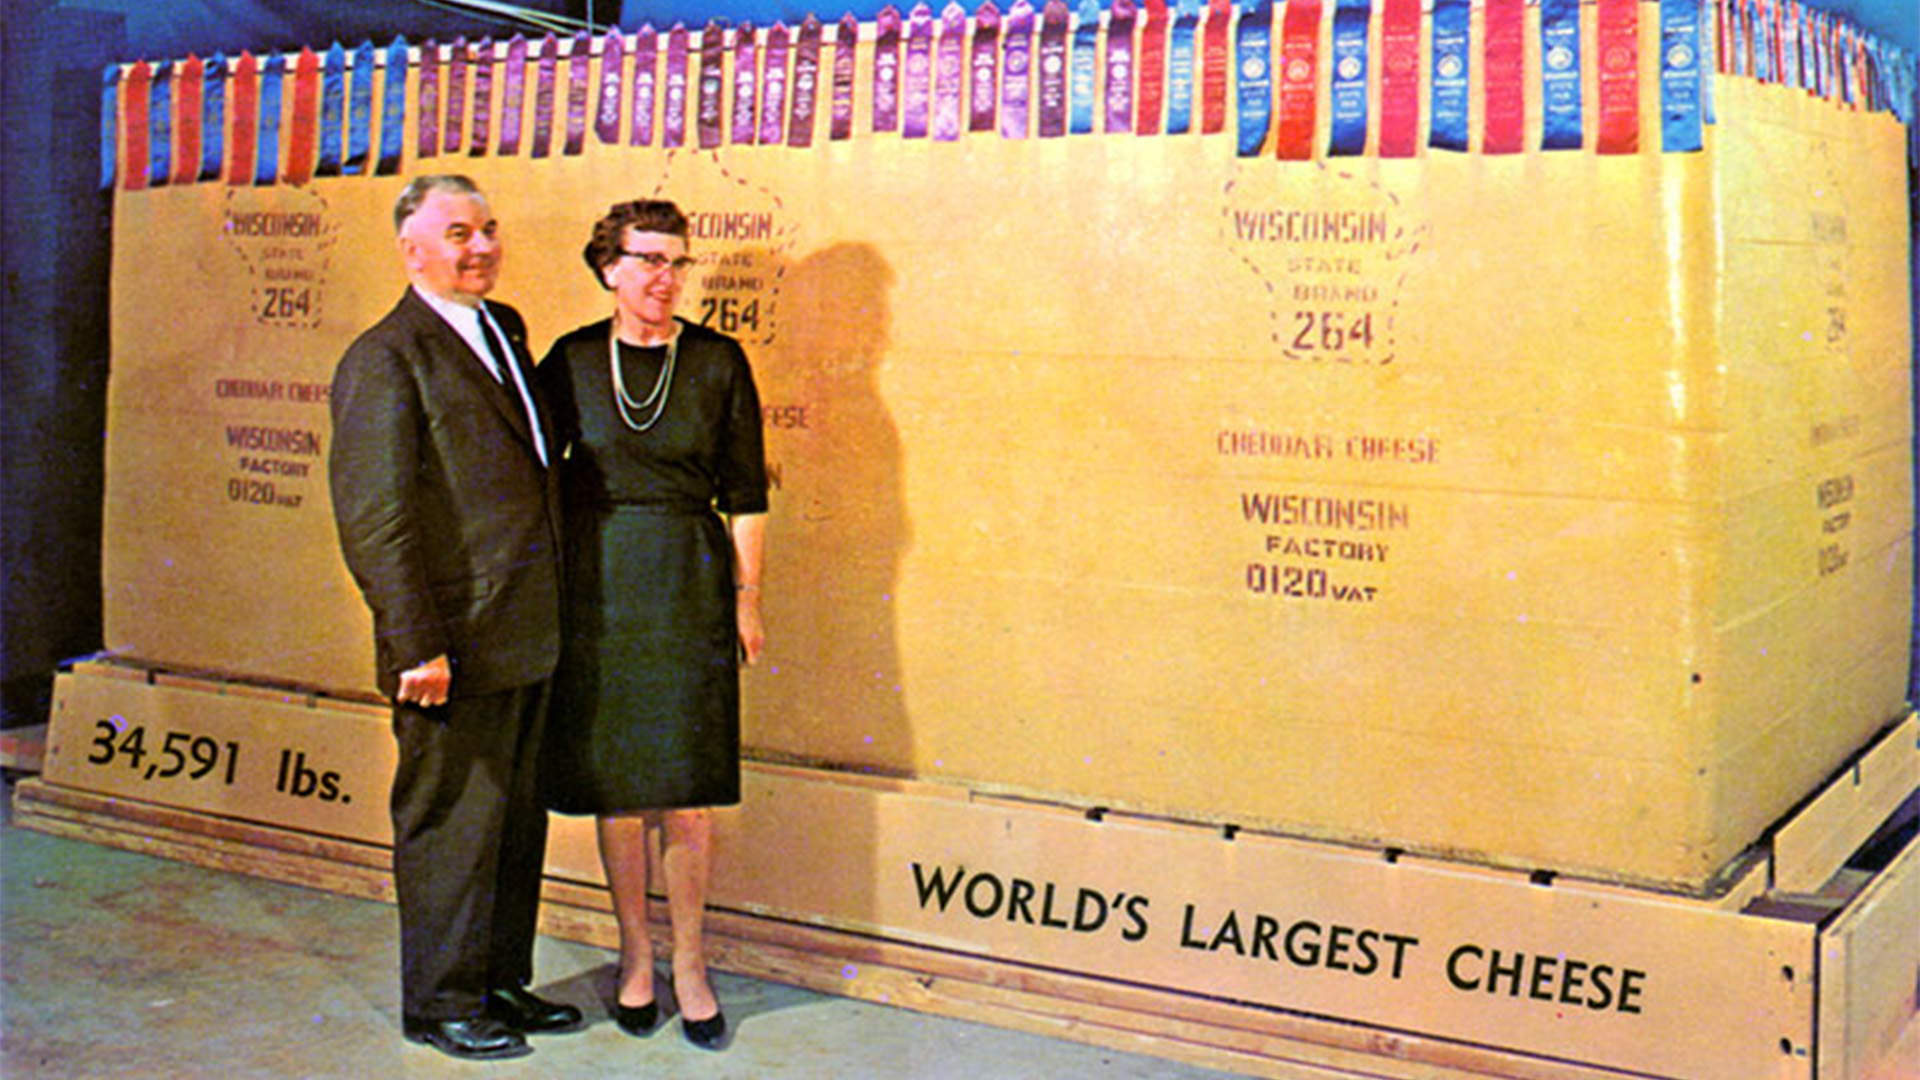 World's Largest Cheese, Made by Steve's Cheese